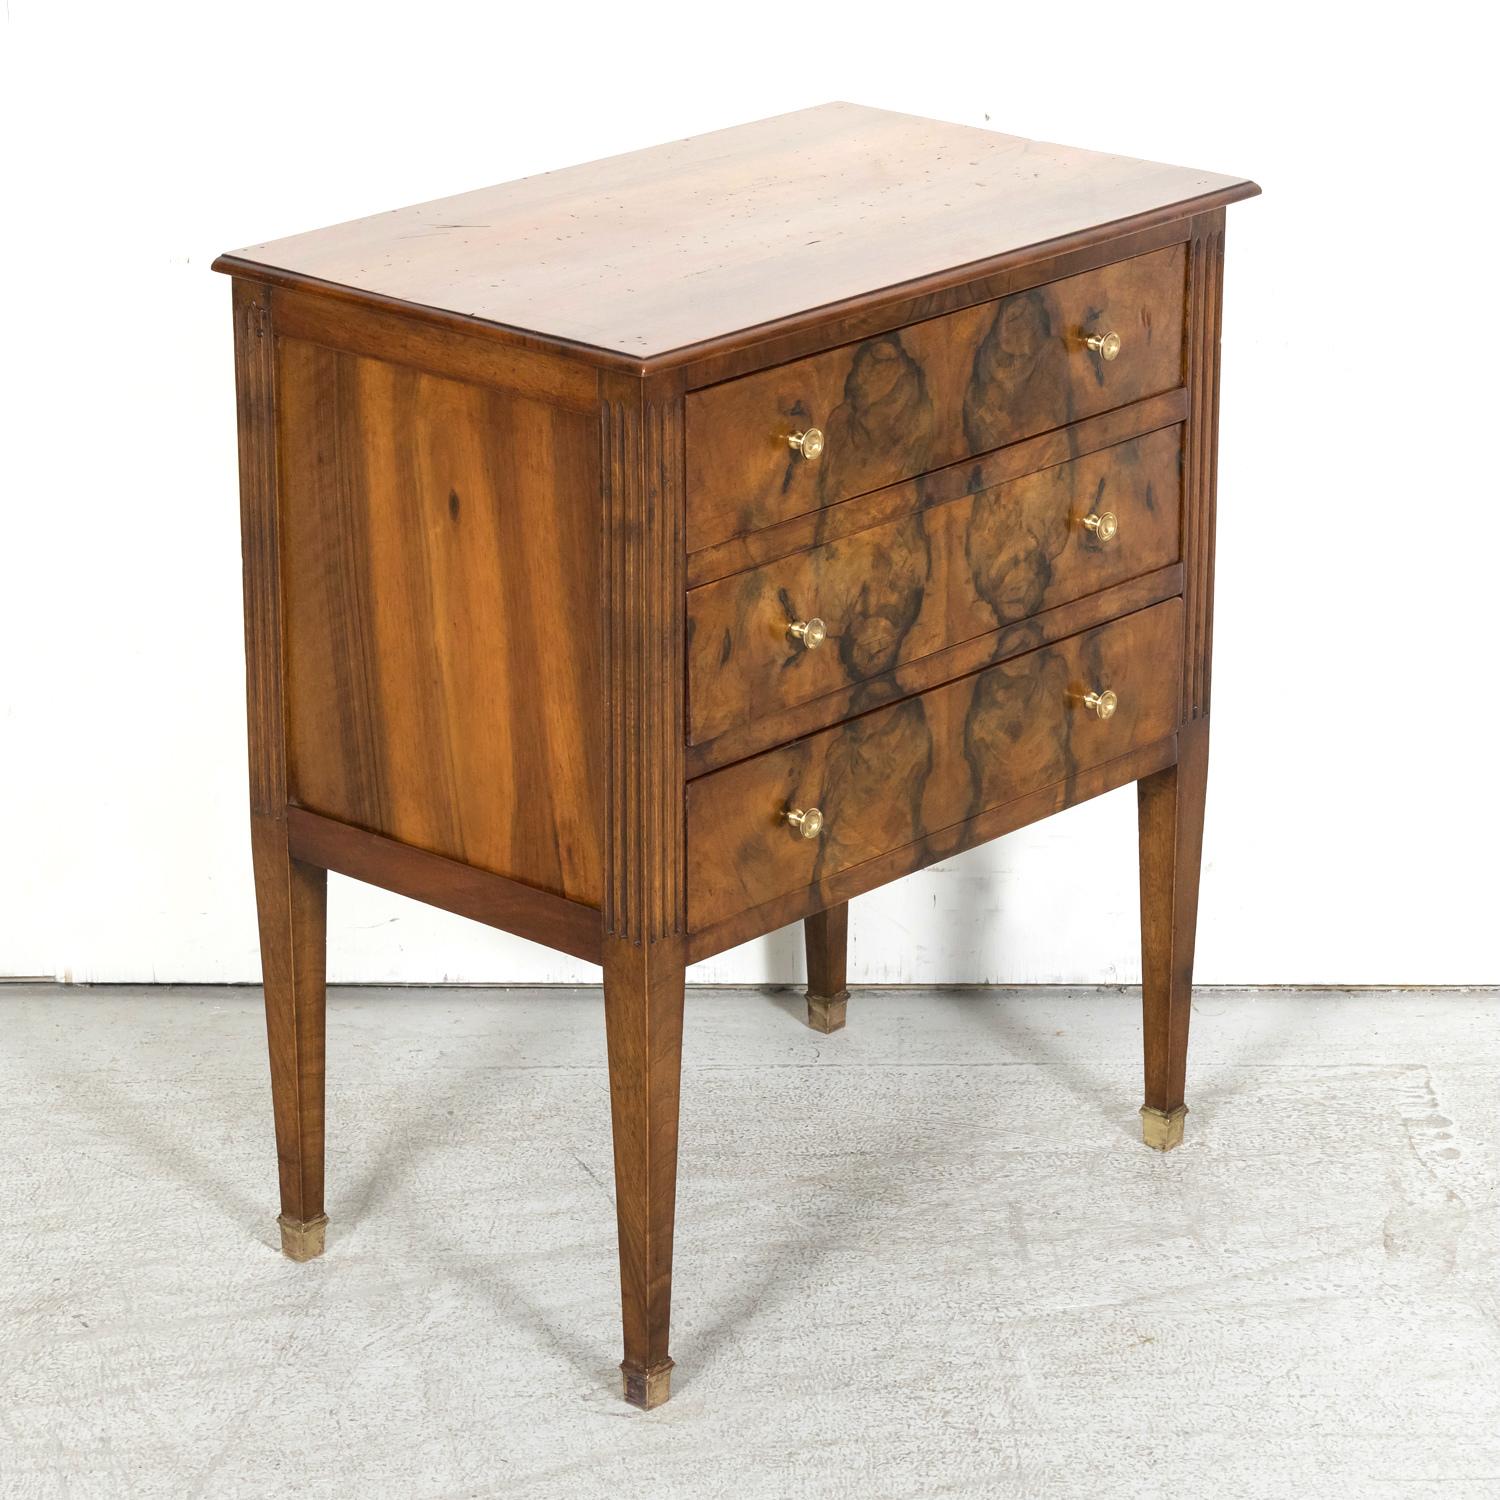 Late 19th Century 19th Century French Louis XVI Style Walnut and Burled Walnut Petite Commode